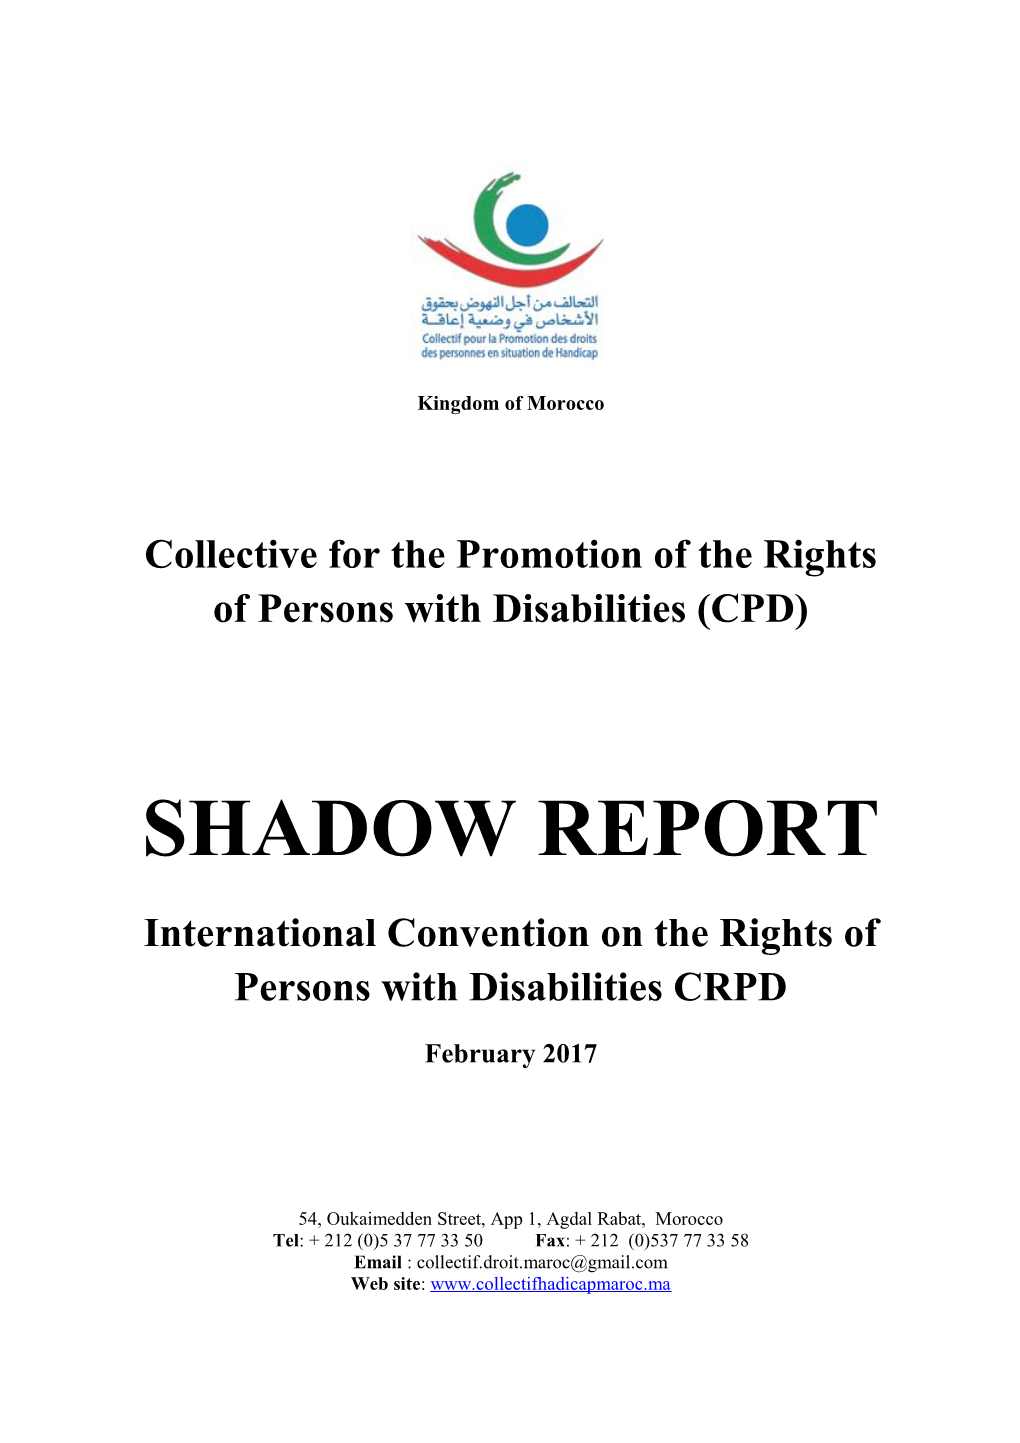 Collective for the Promotion of the Rights of Persons with Disabilities (CPD)